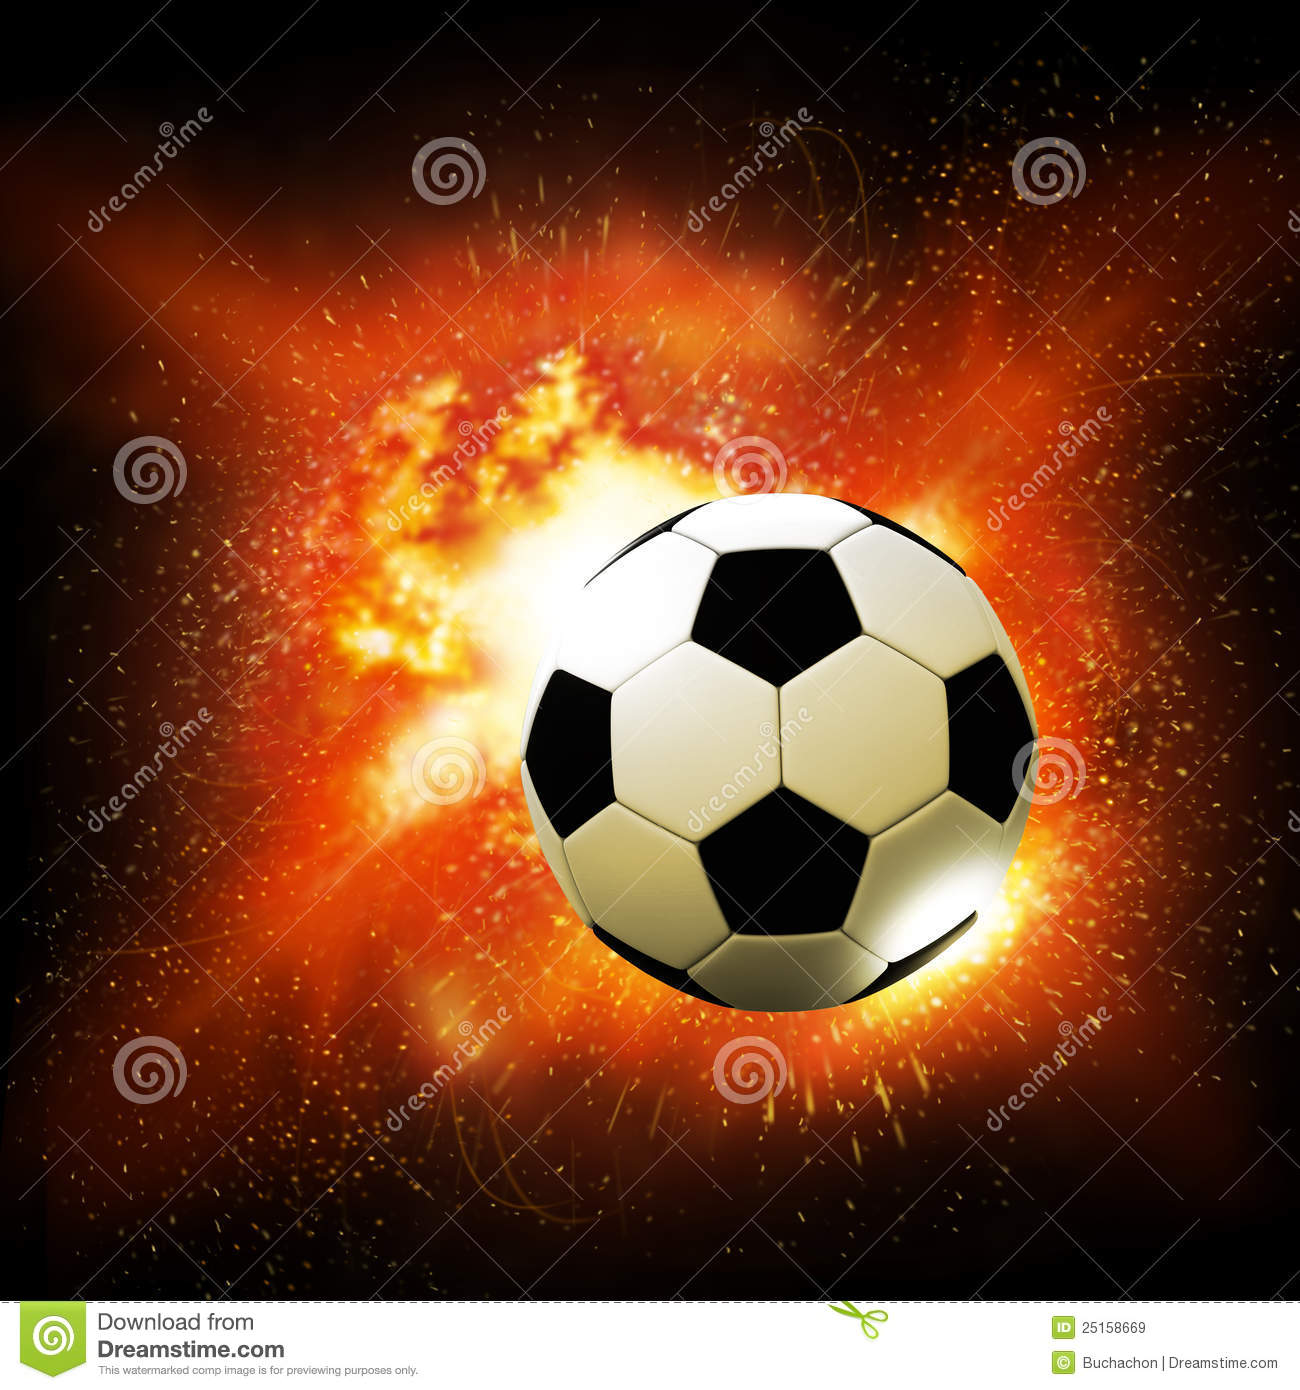 Flame Soccer Ball Royalty Free Stock Images   Image  25158669